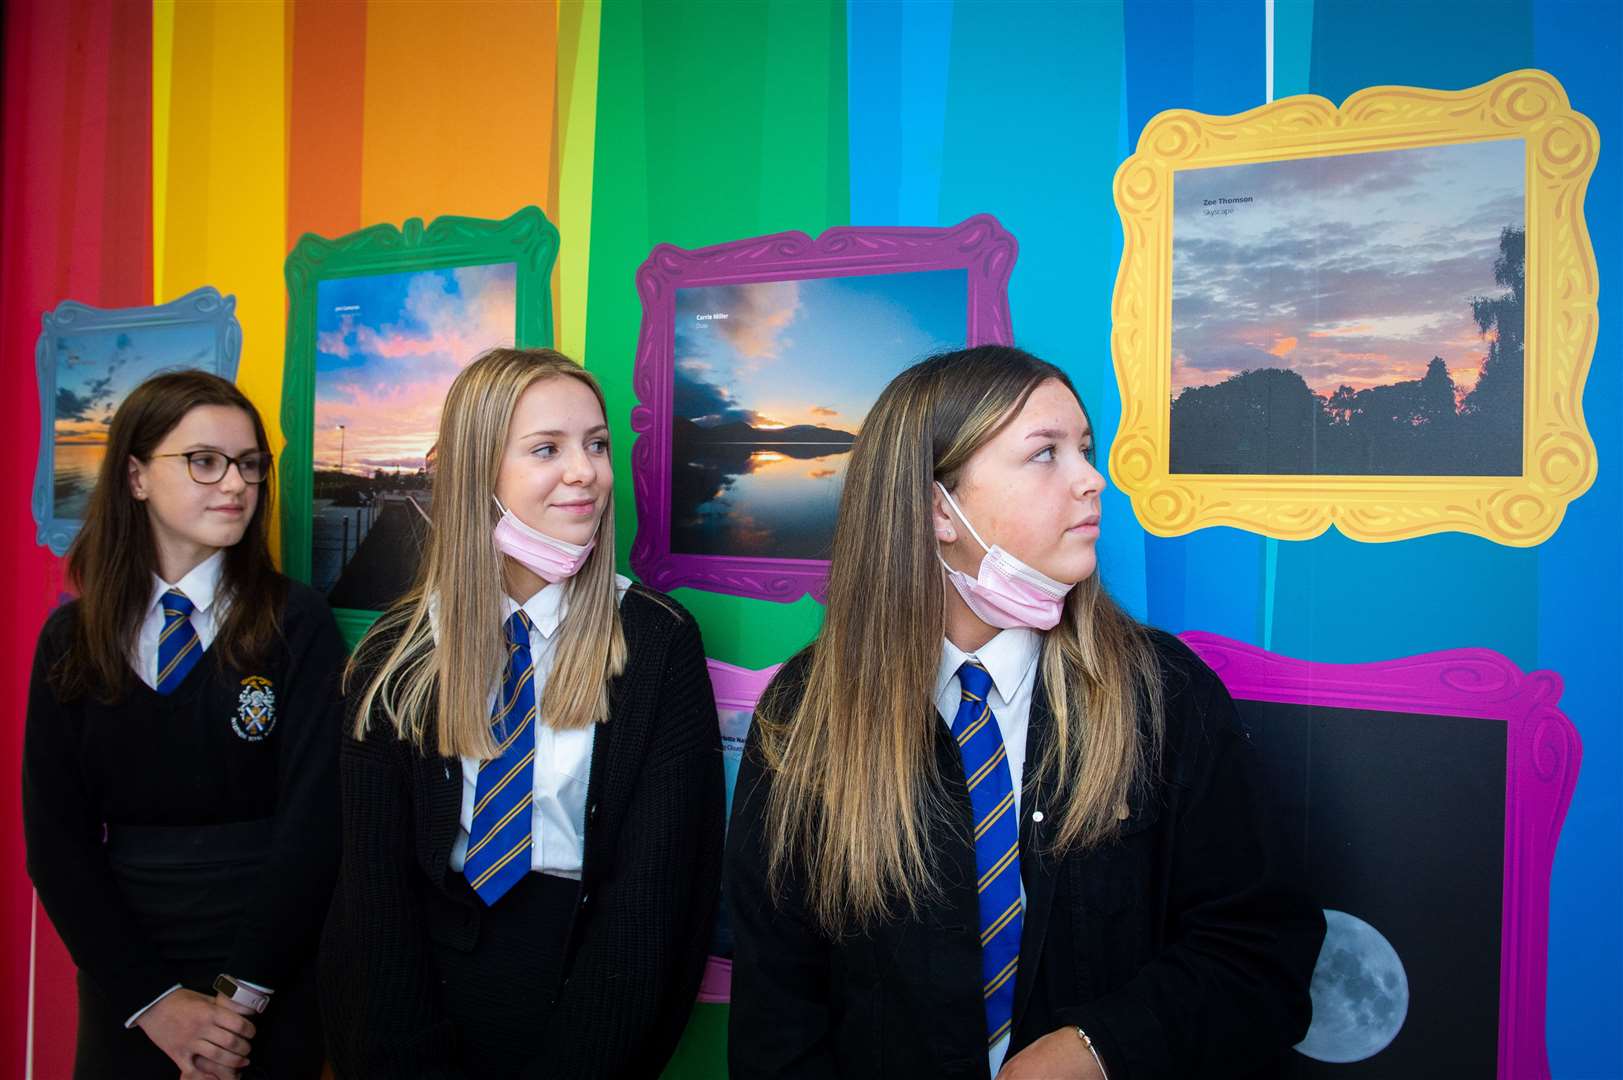 Pupils Jani Cameron, Carrie Miller and Zoe Thomson.